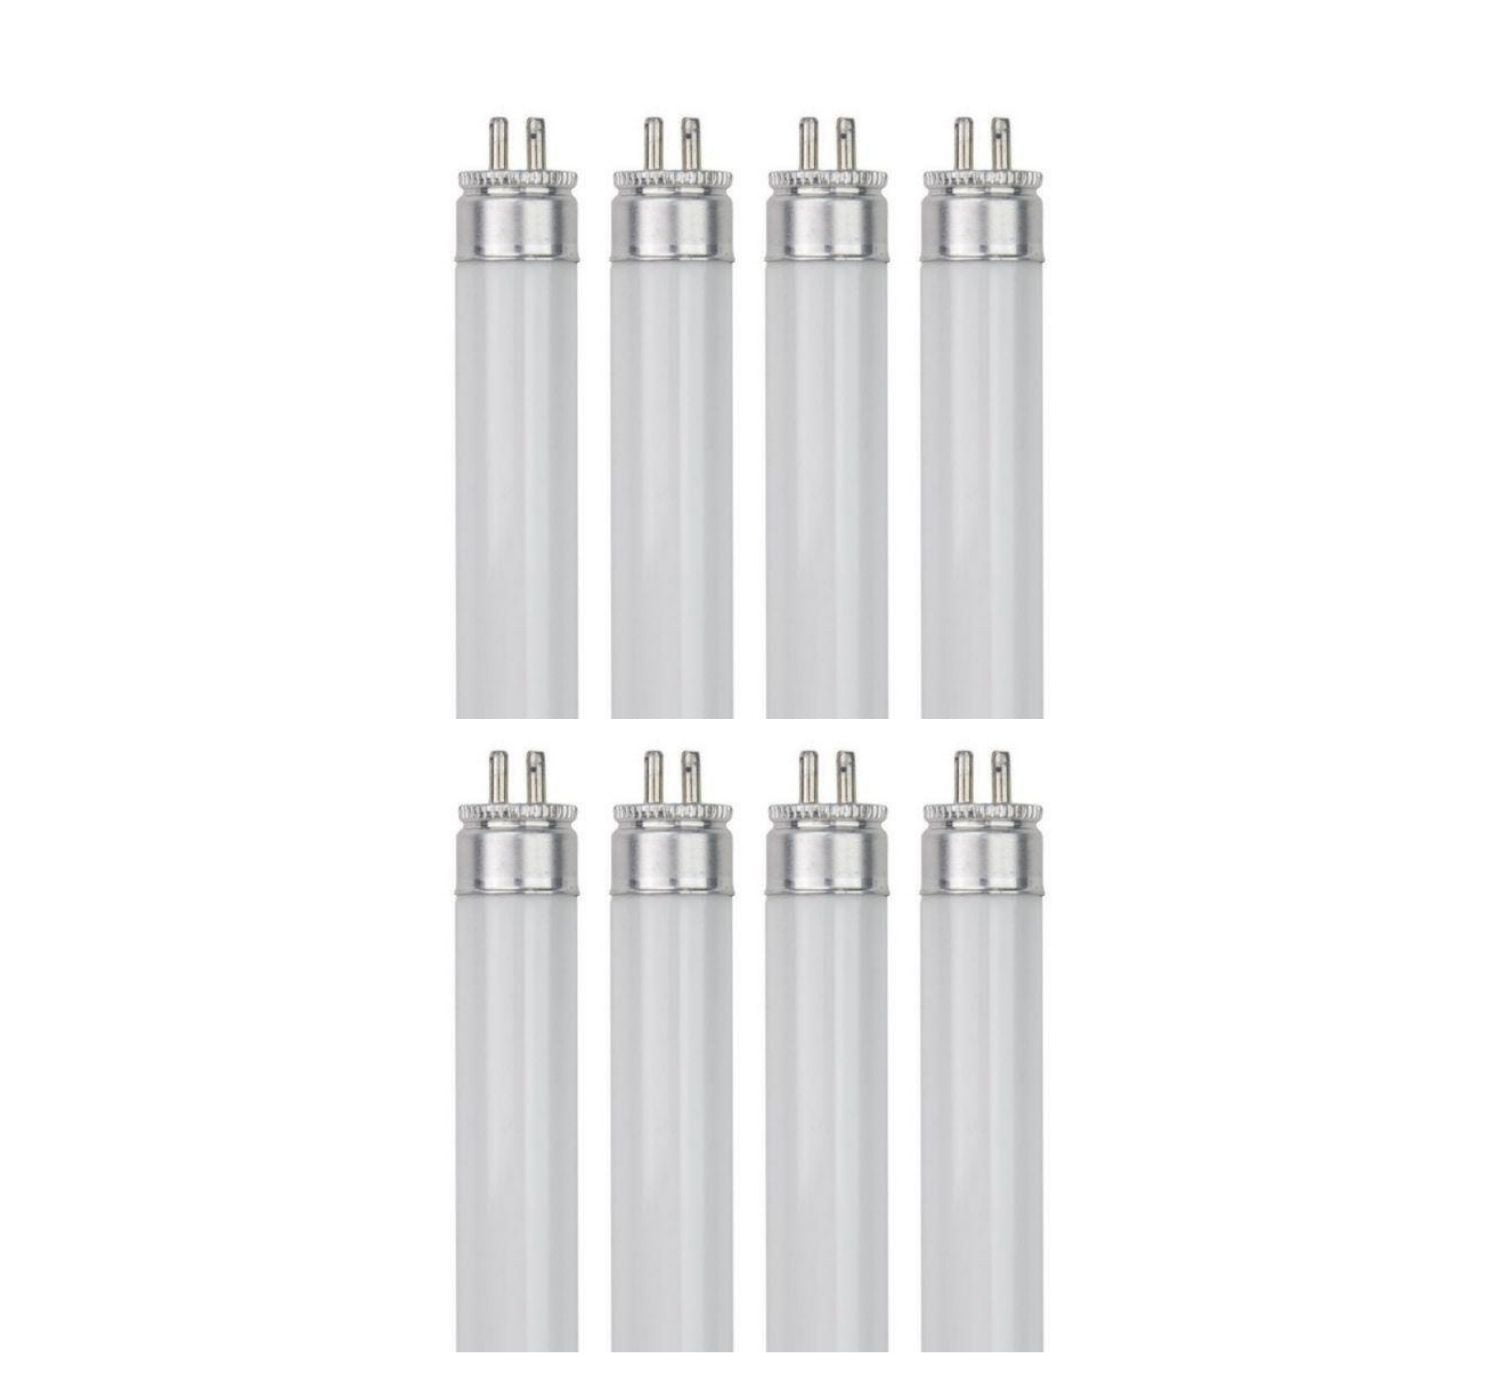 PACK OF 60 F13T5/CW FLUORESCENT TUBE/LAMP BIPIN 